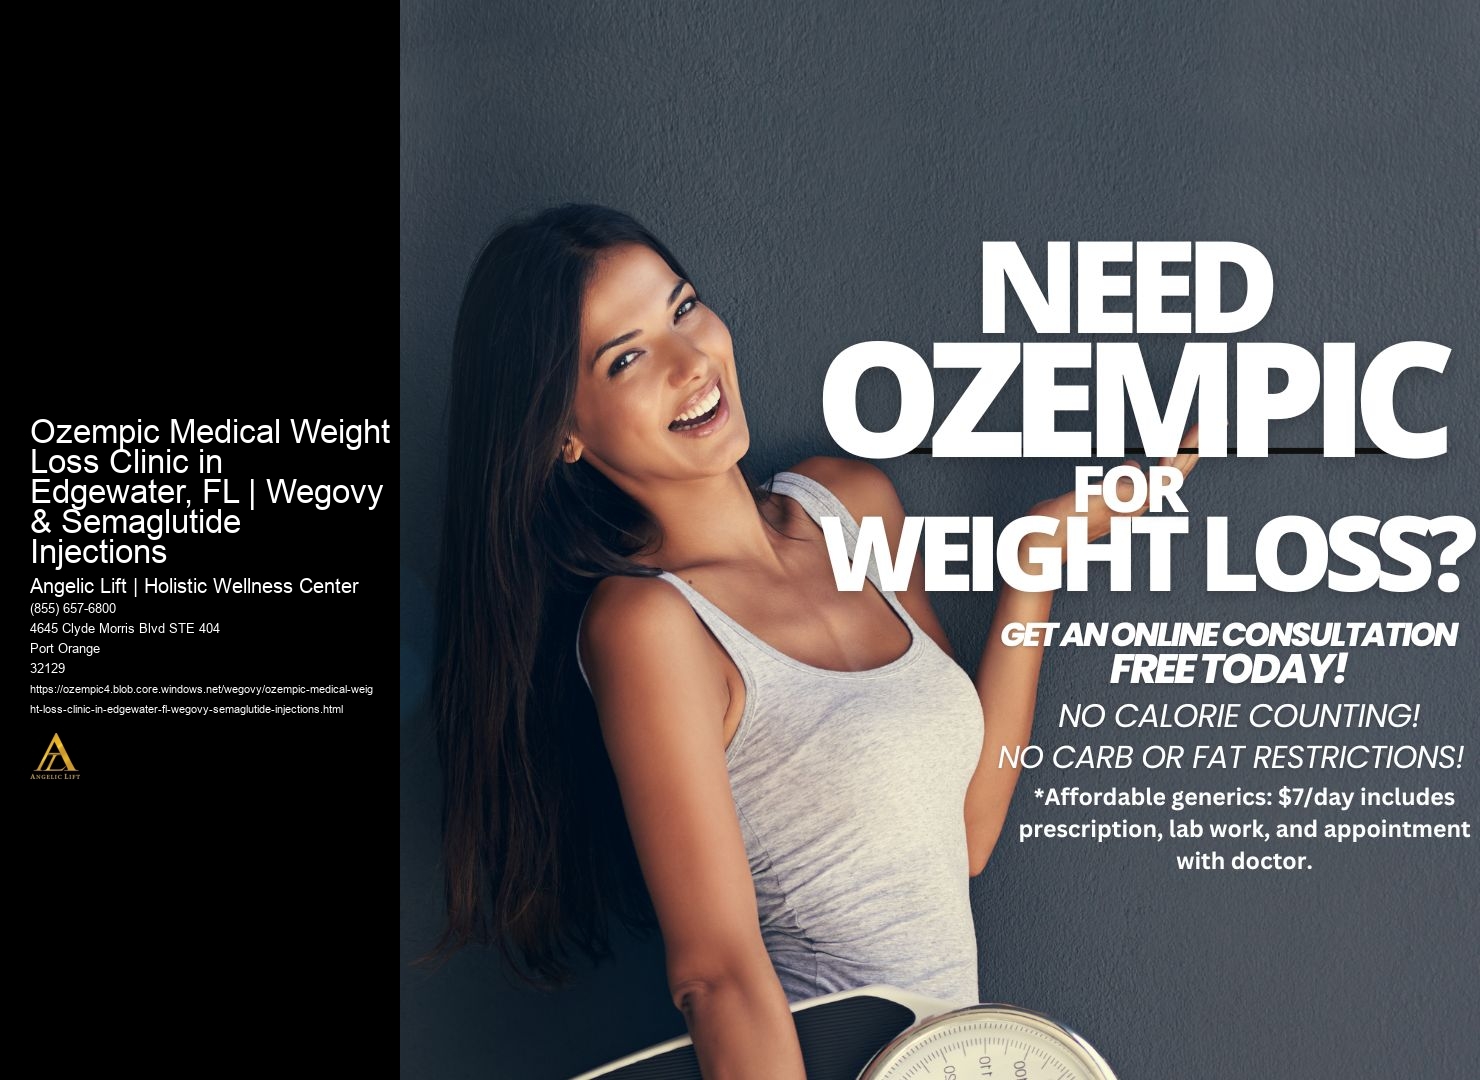 Ozempic Medical Weight Loss Clinic in Edgewater, FL | Wegovy & Semaglutide Injections